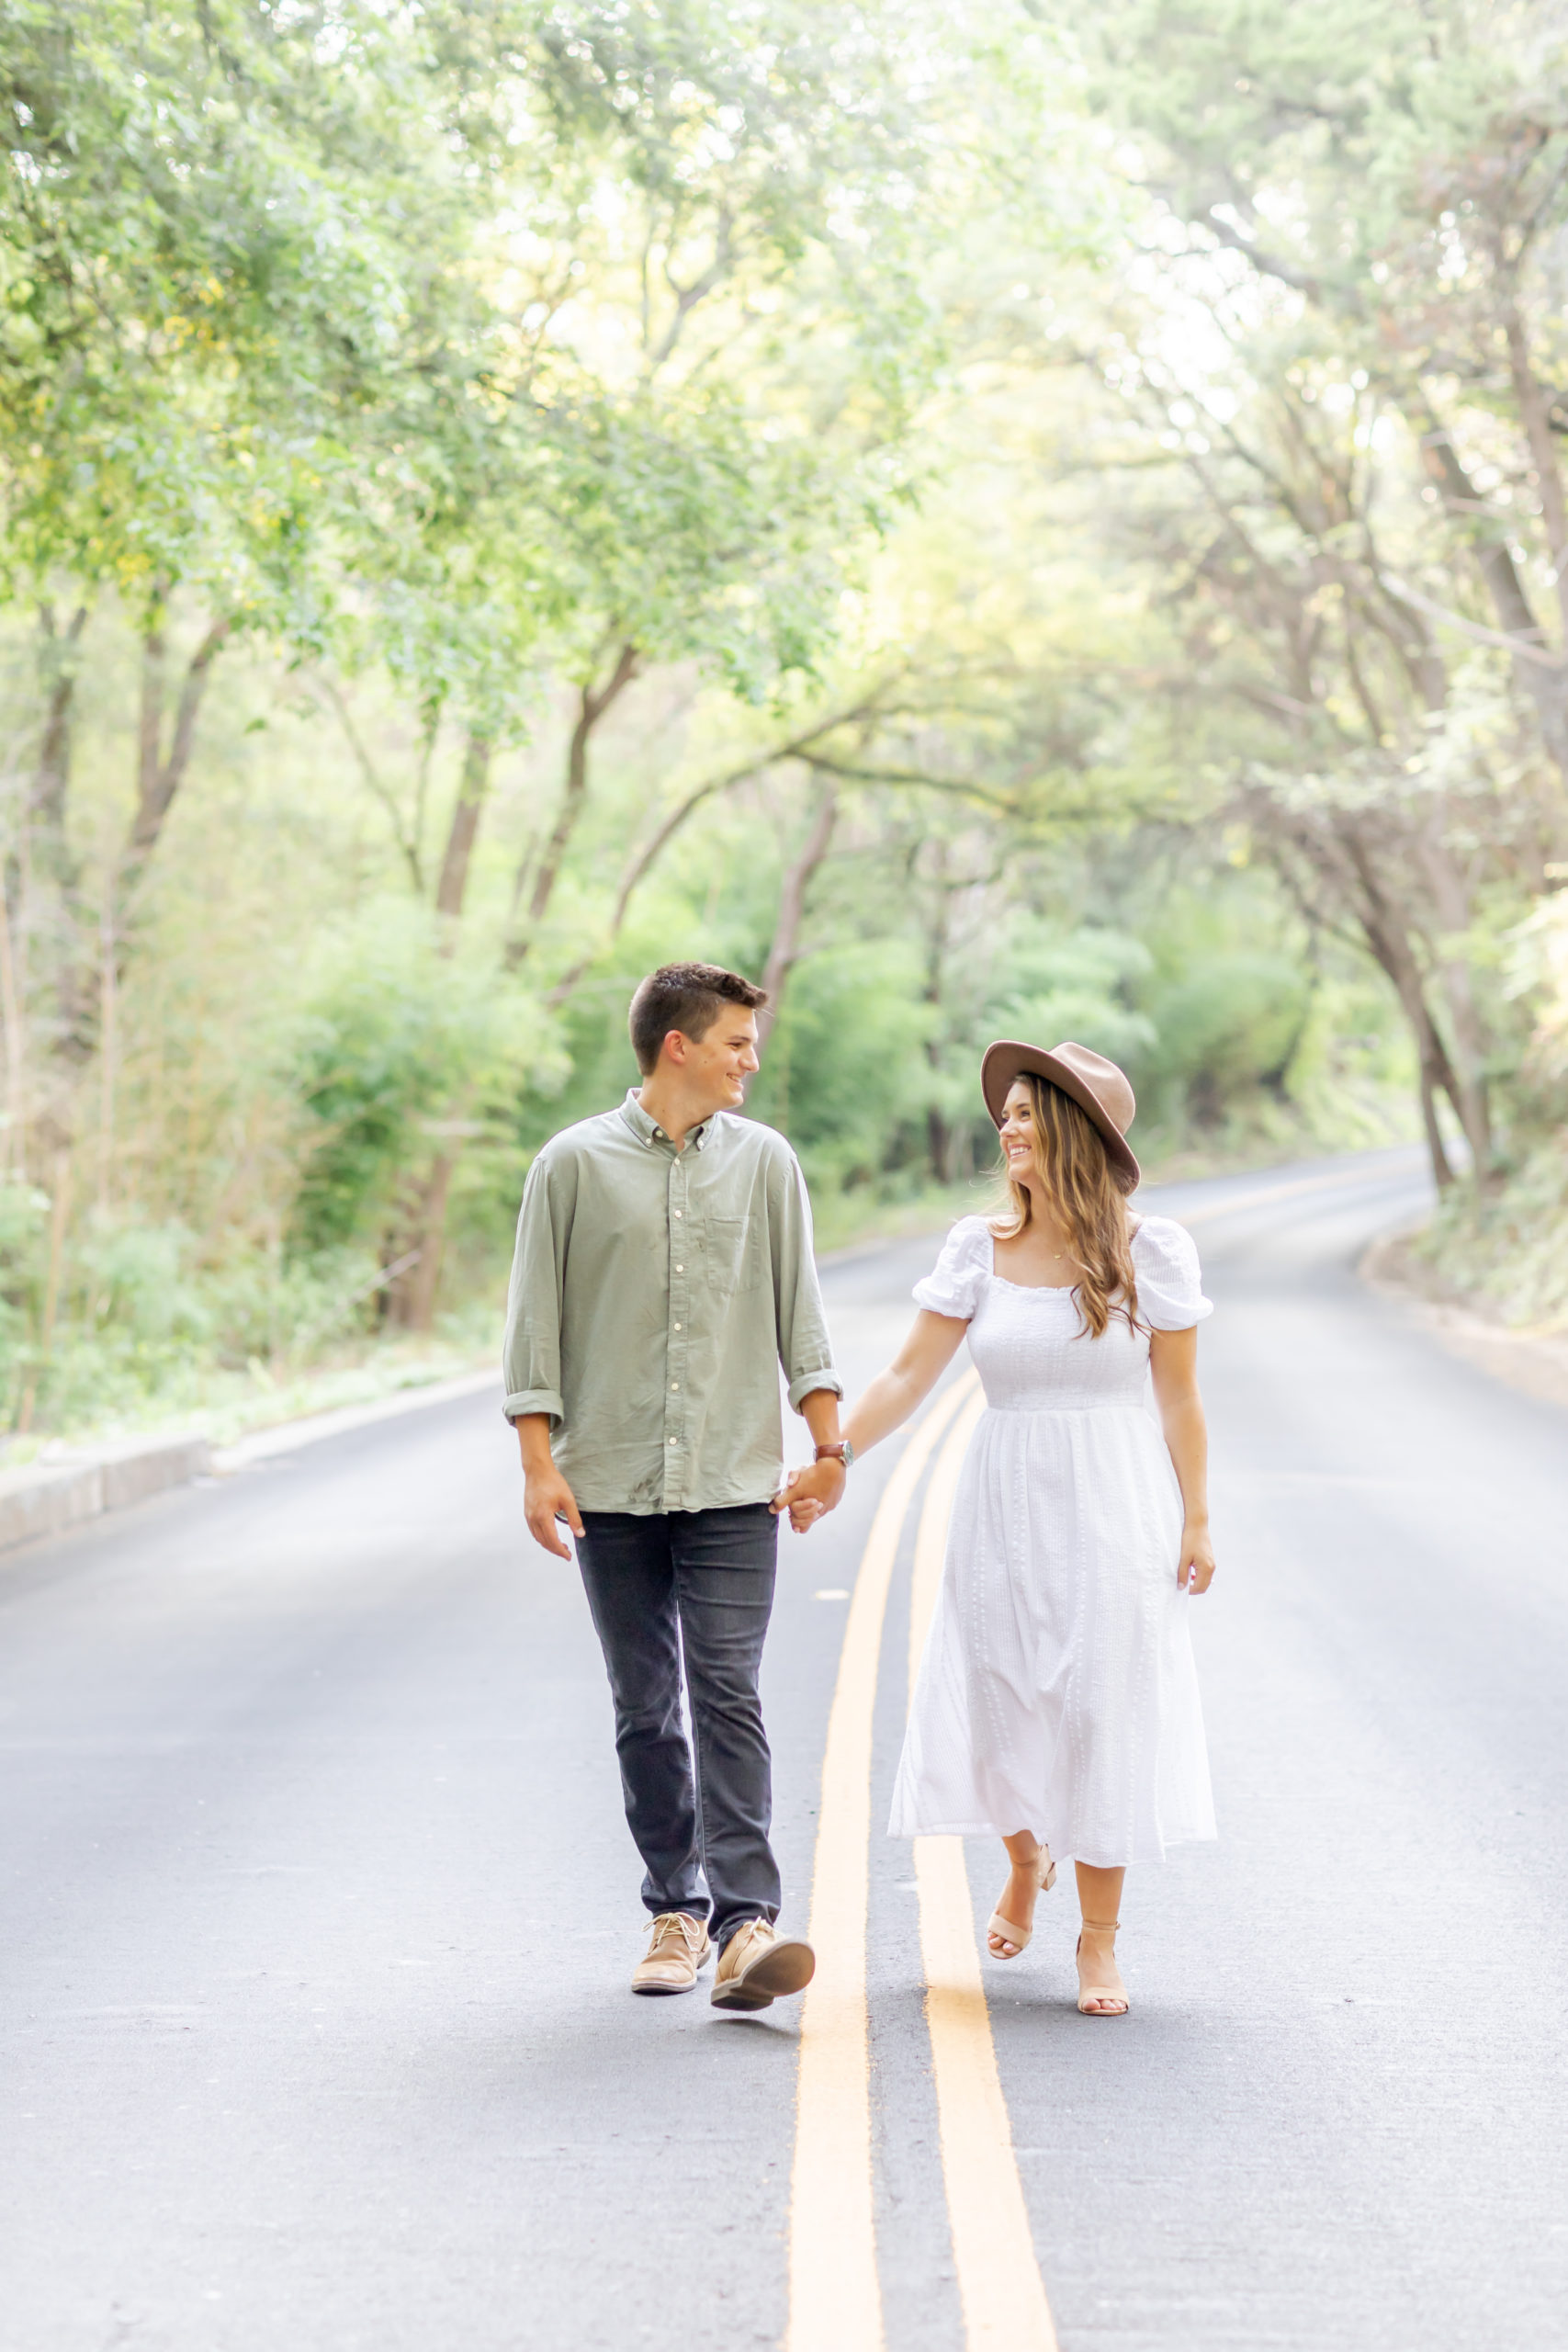 walking hand in hand down road engagement photo